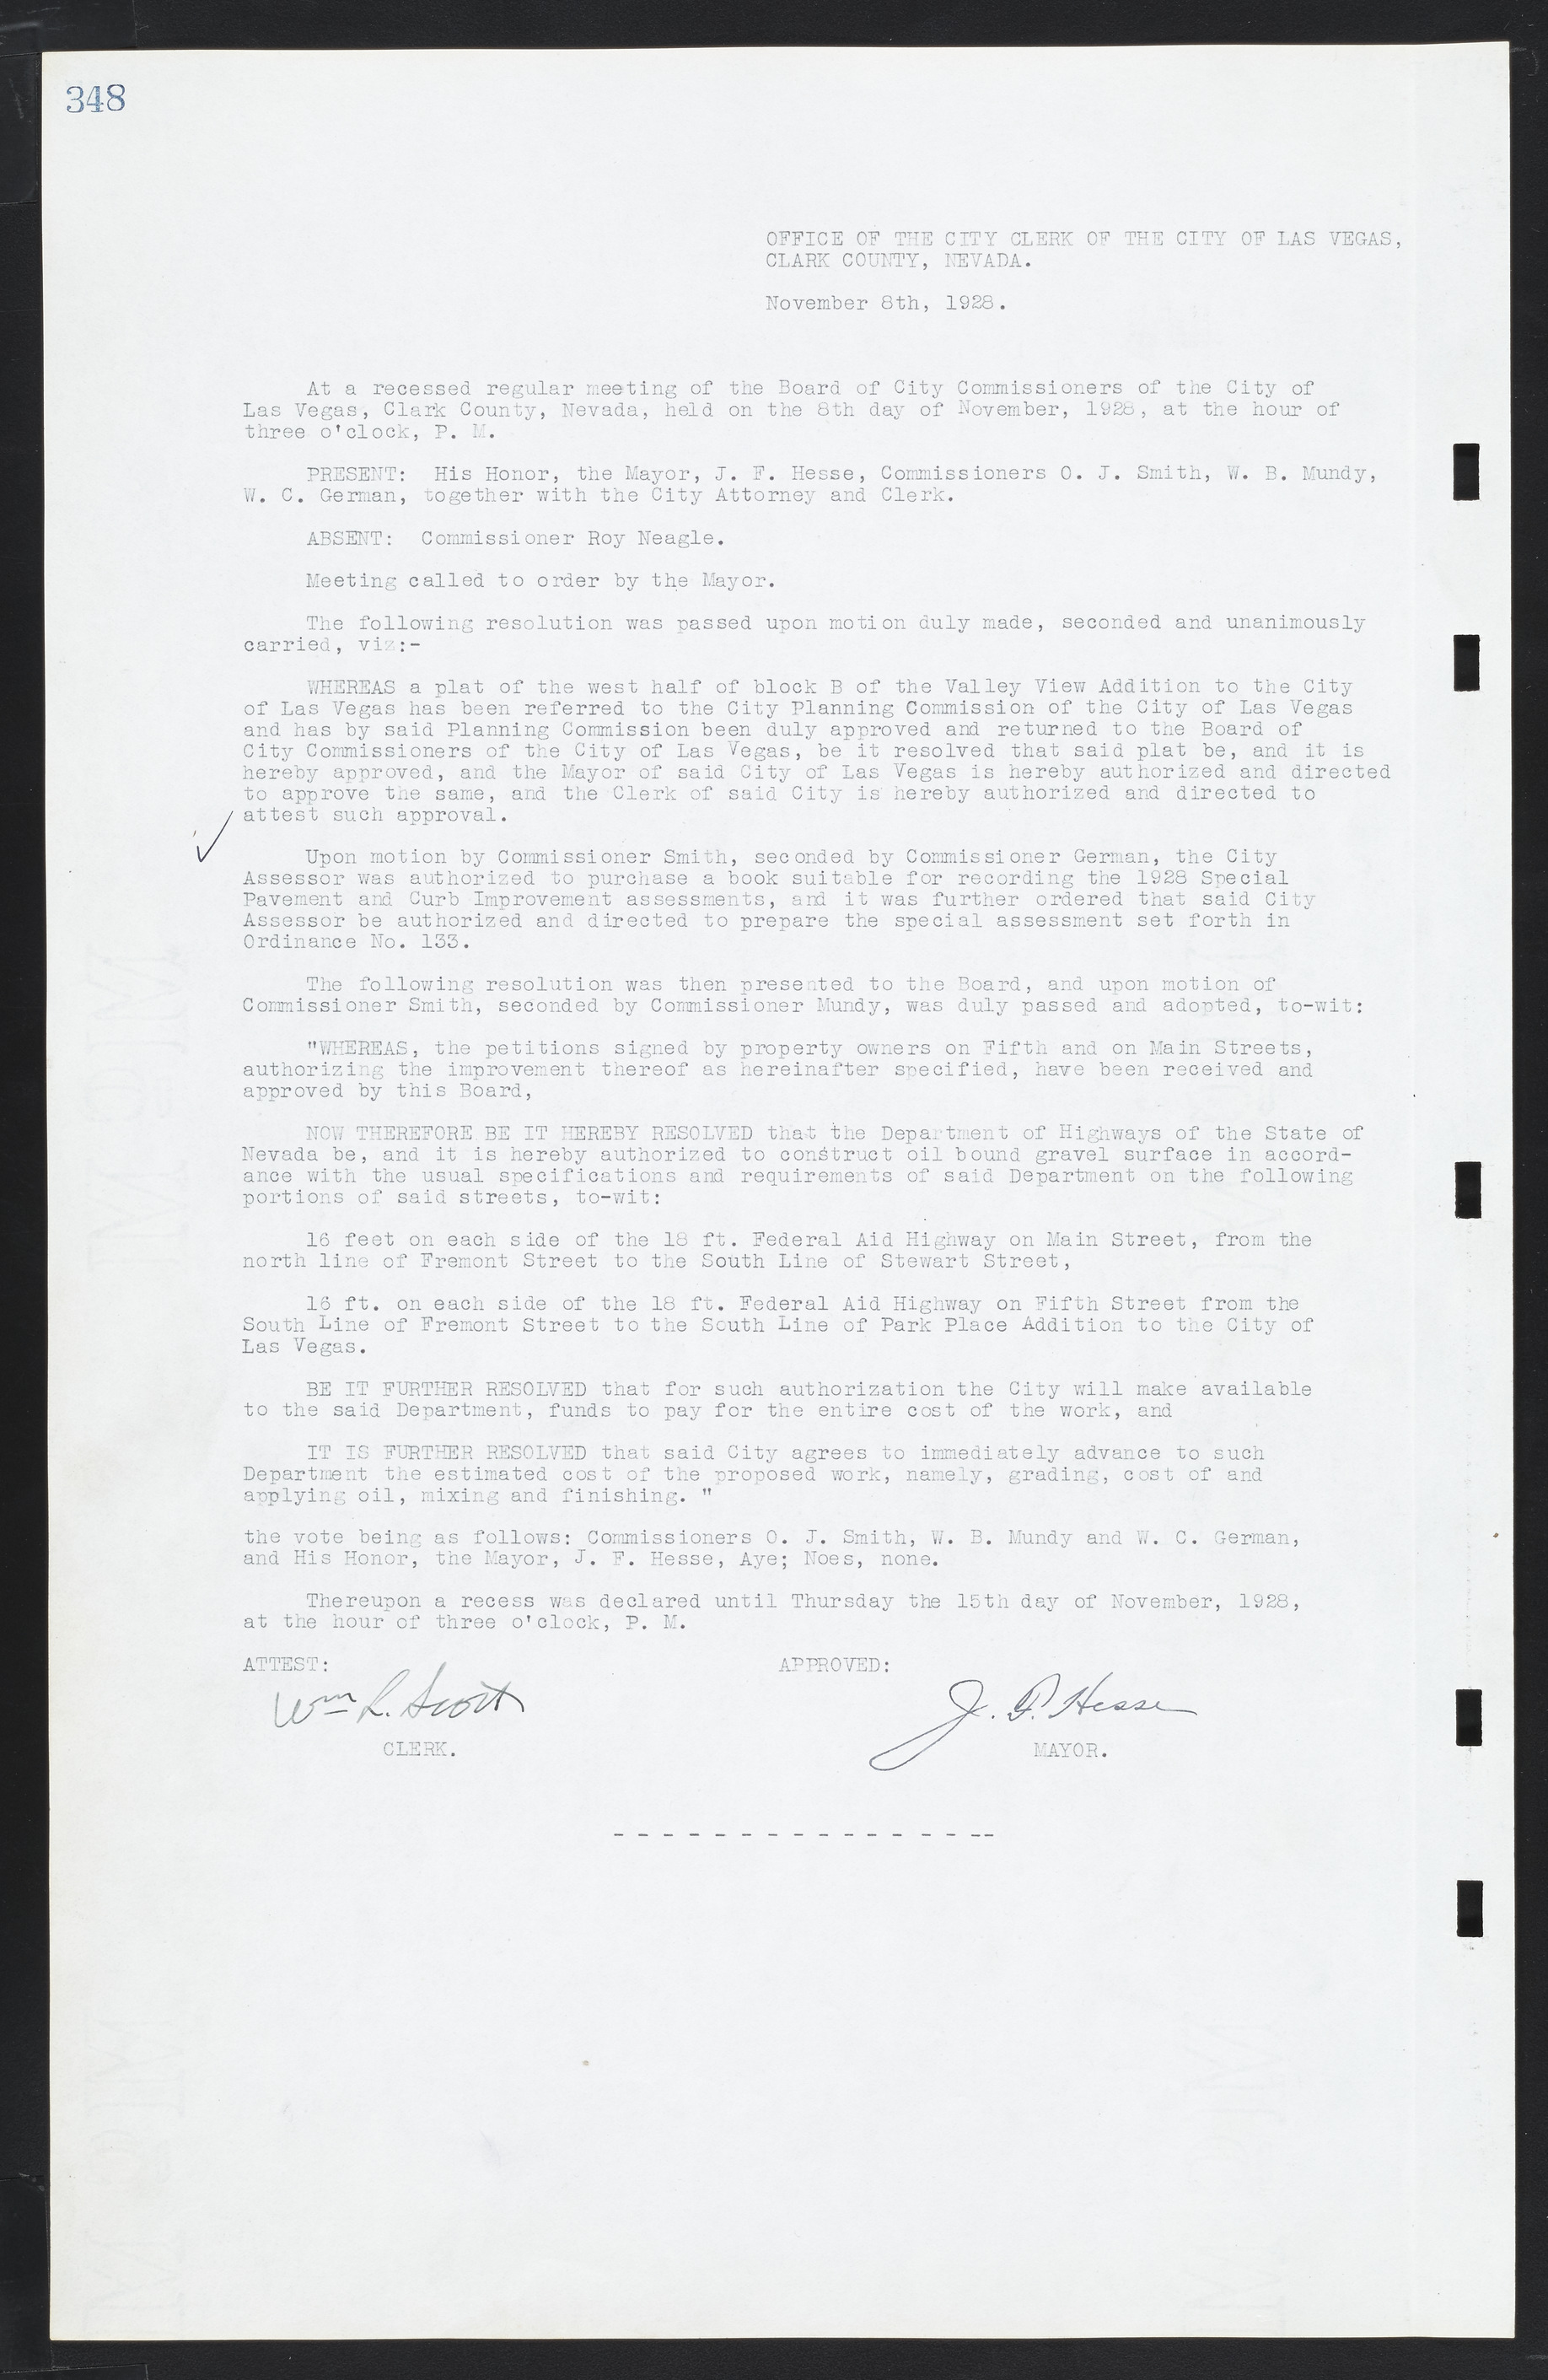 Las Vegas City Commission Minutes, March 1, 1922 to May 10, 1929, lvc000002-357